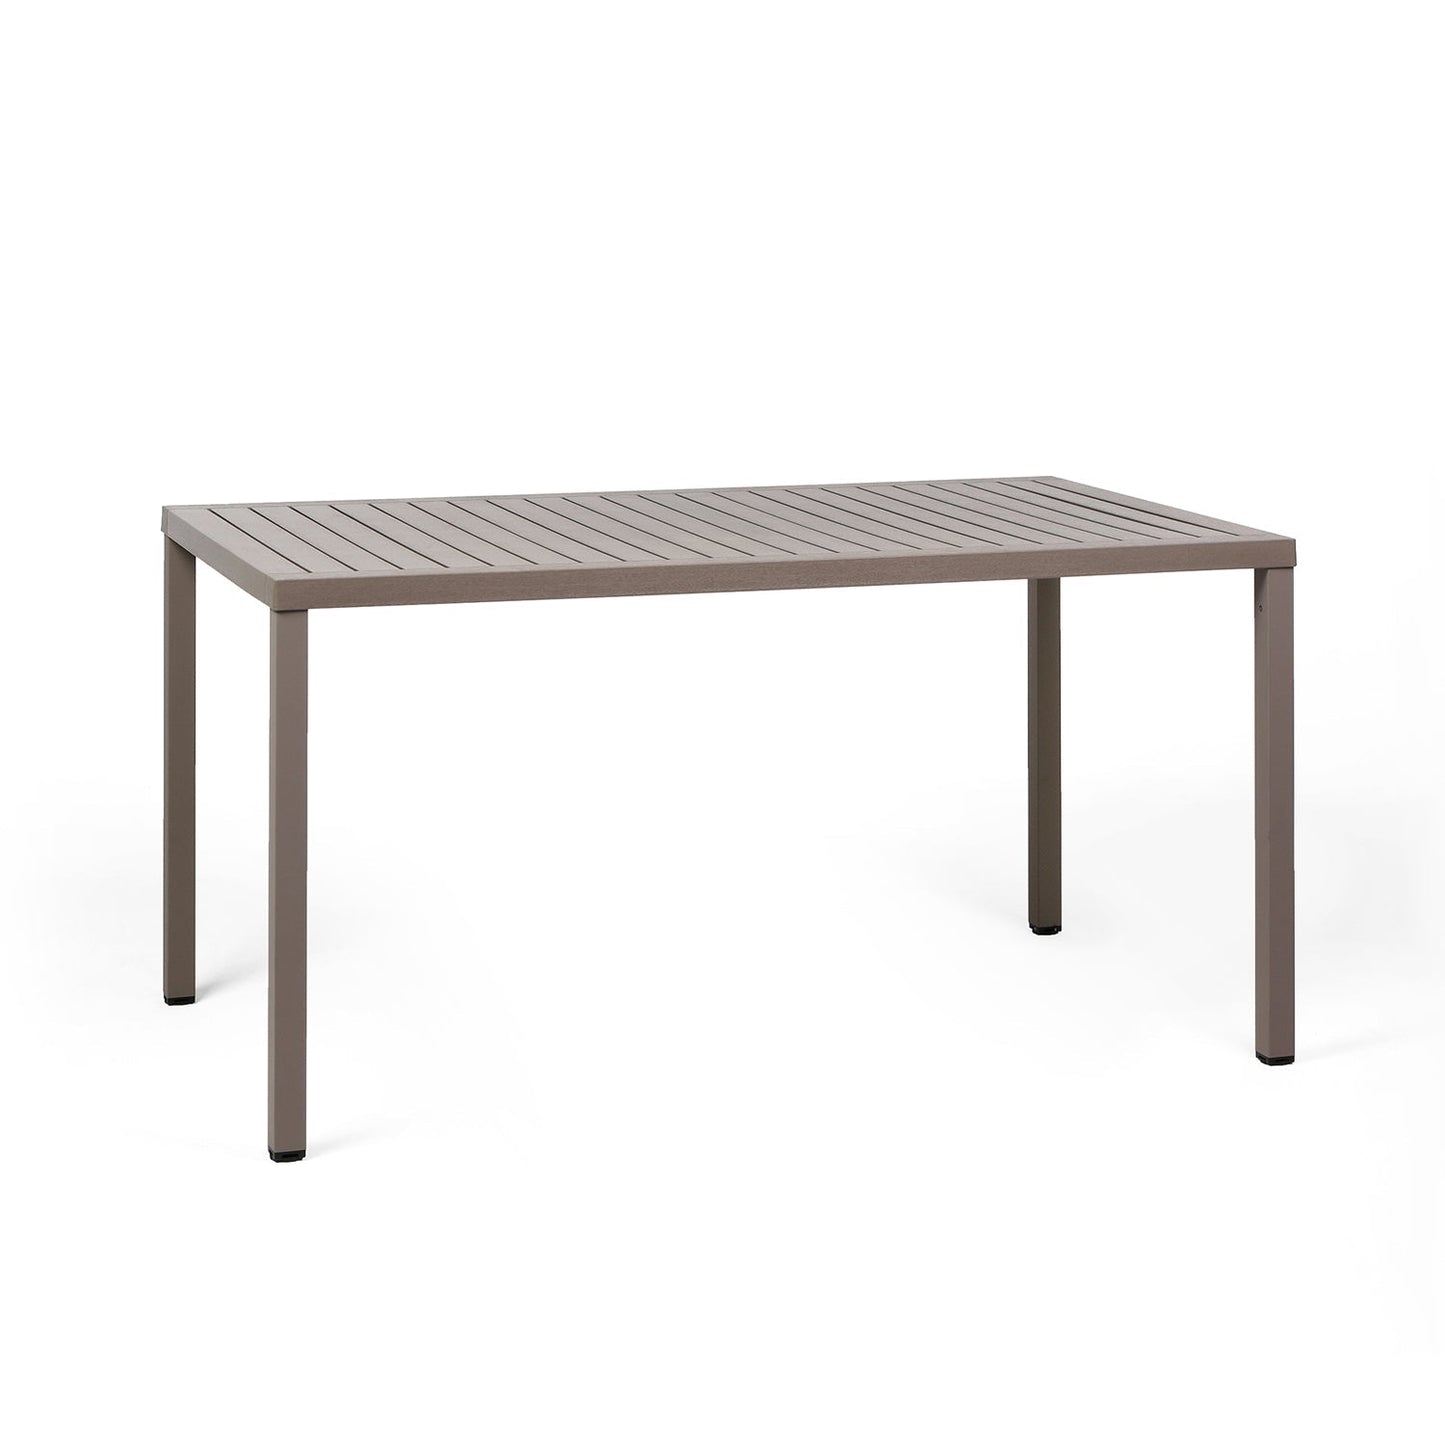 Cube 140 Garden Table In Taupe